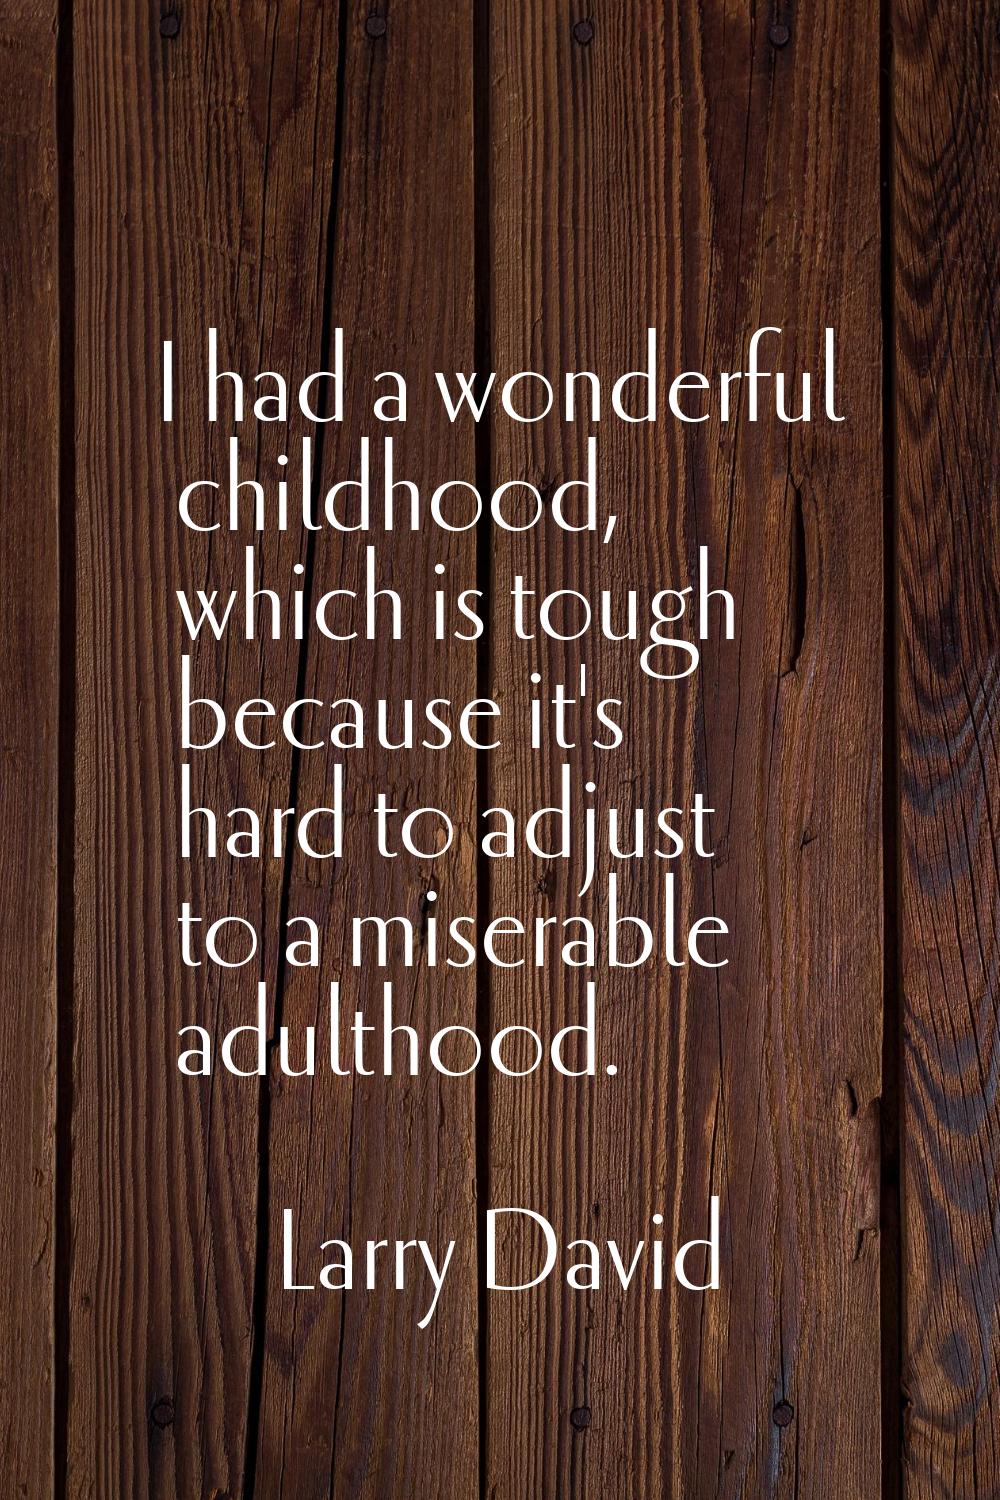 I had a wonderful childhood, which is tough because it's hard to adjust to a miserable adulthood.